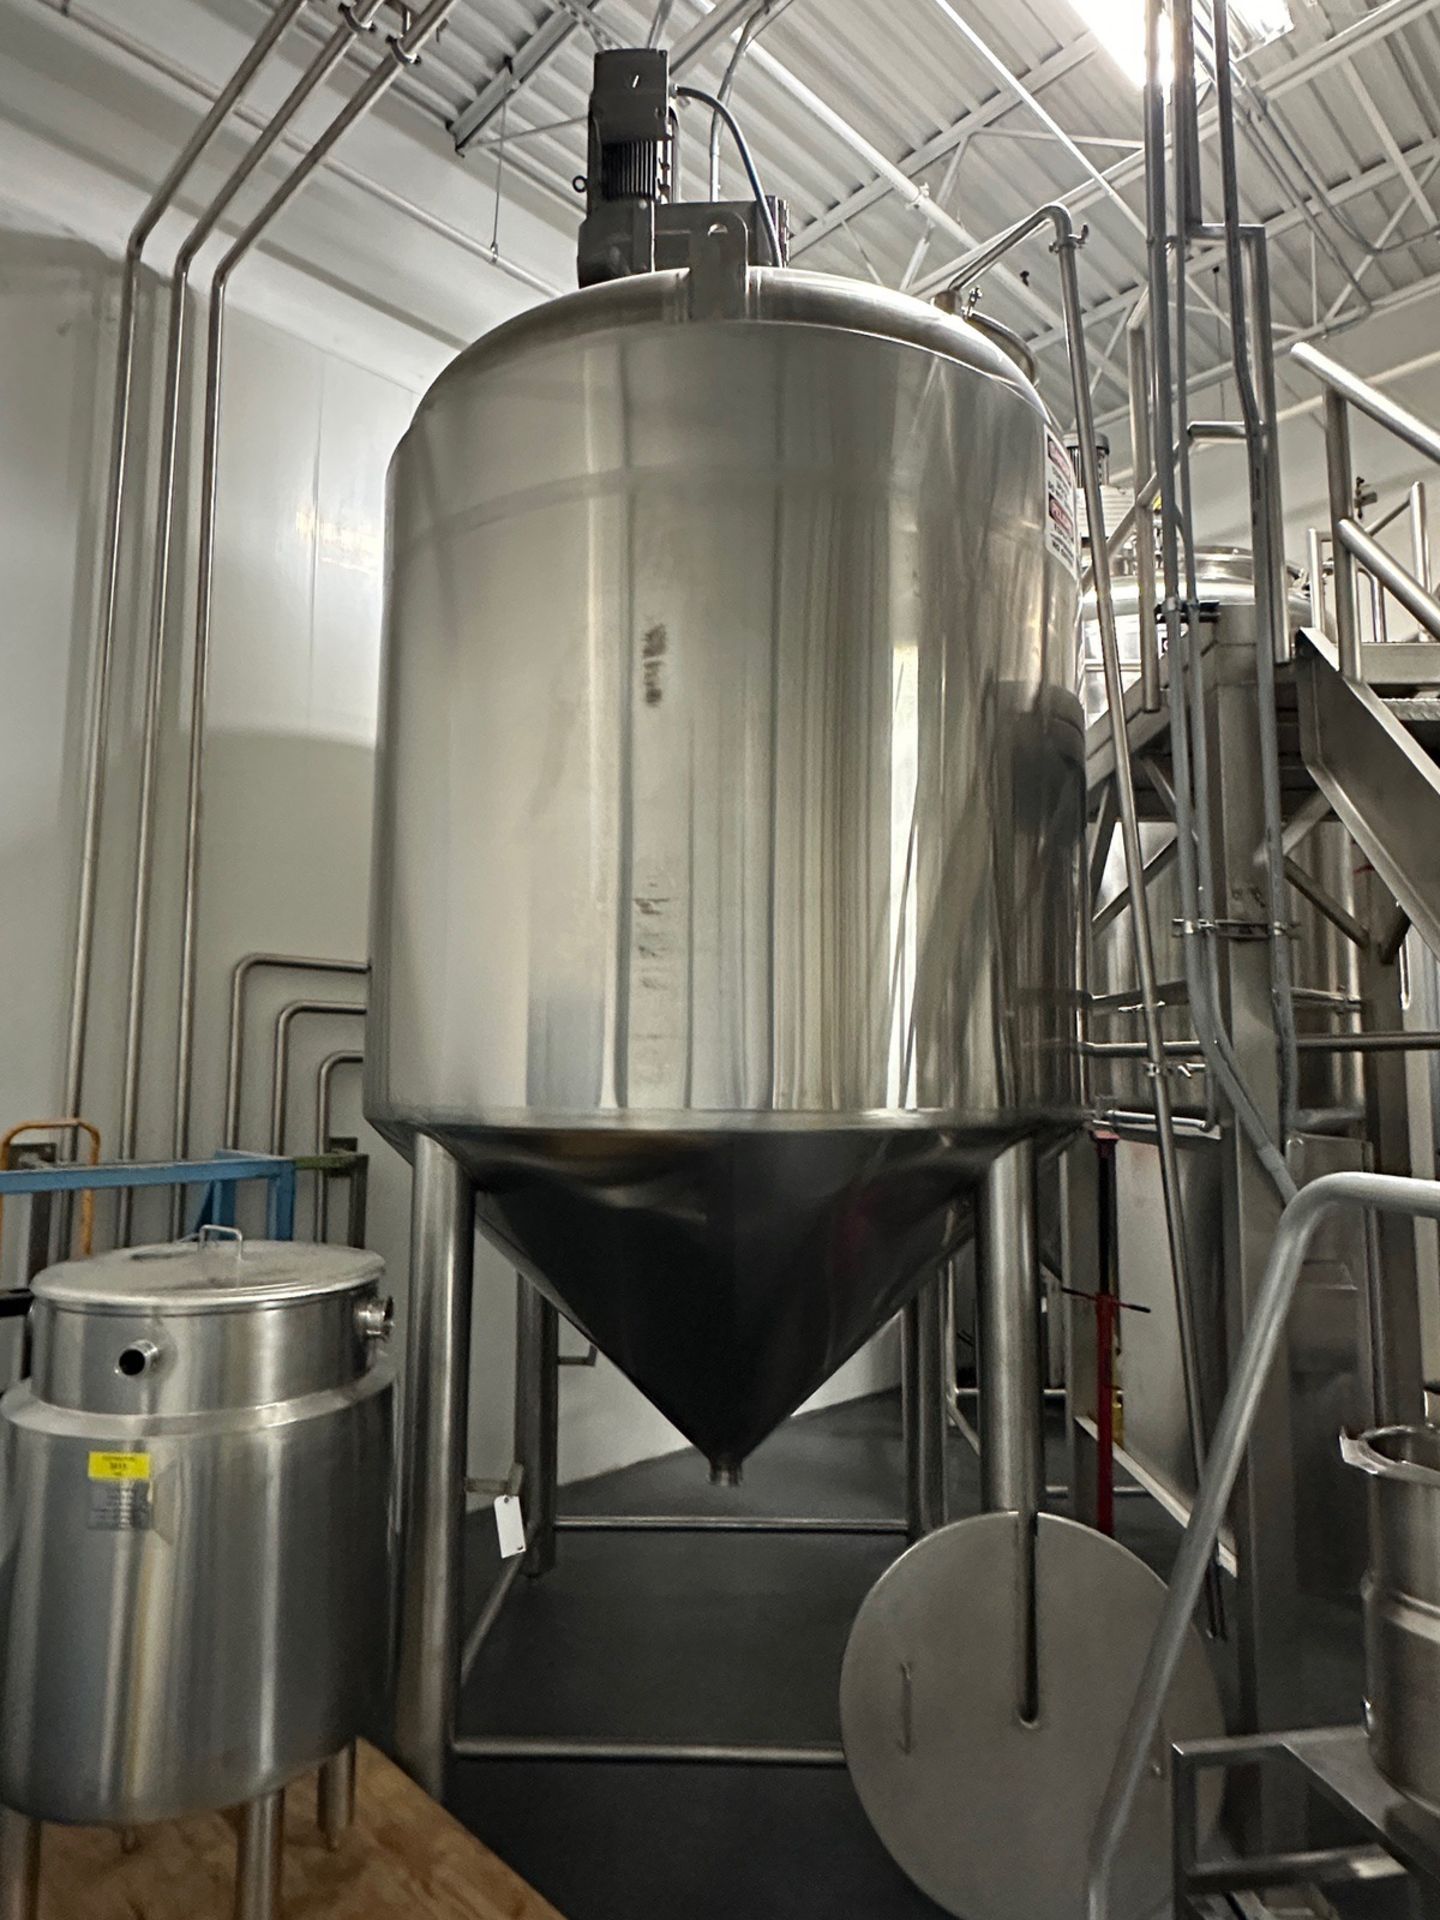 Anco 2,000 Gallon Stainless Steel Tank - Cone Bottom, Glycol Jacketed, Top Mounted Agitation with